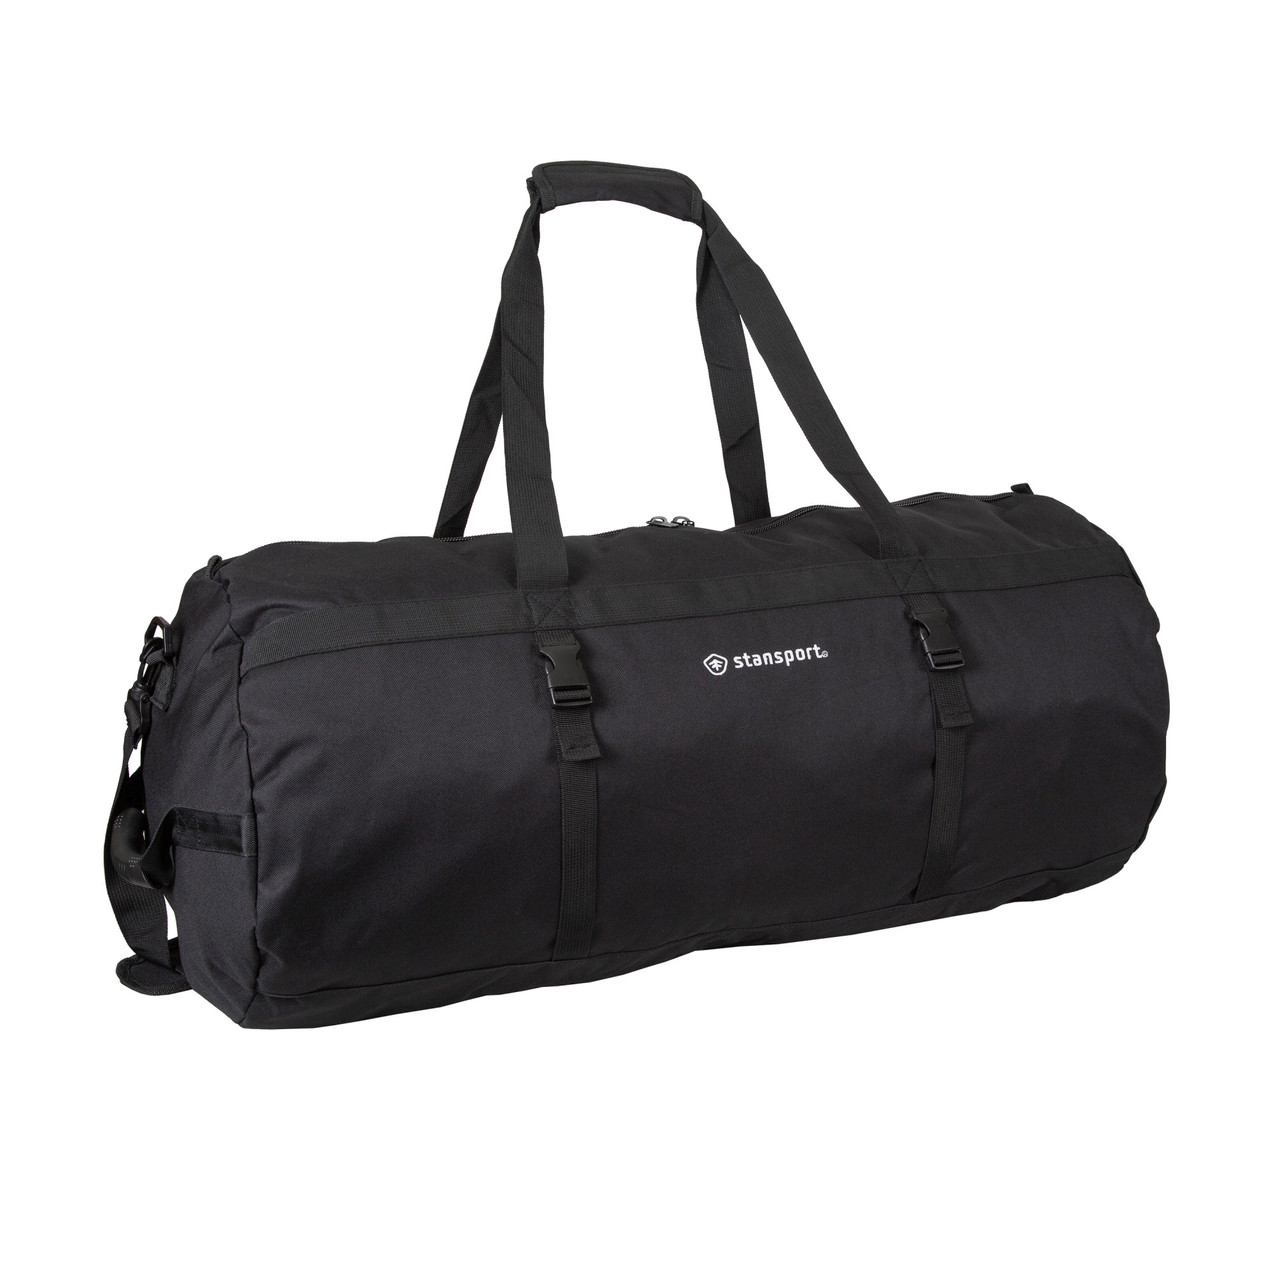 New Kenneth Cole Black Duffle Bag 20 Inches With India | Ubuy